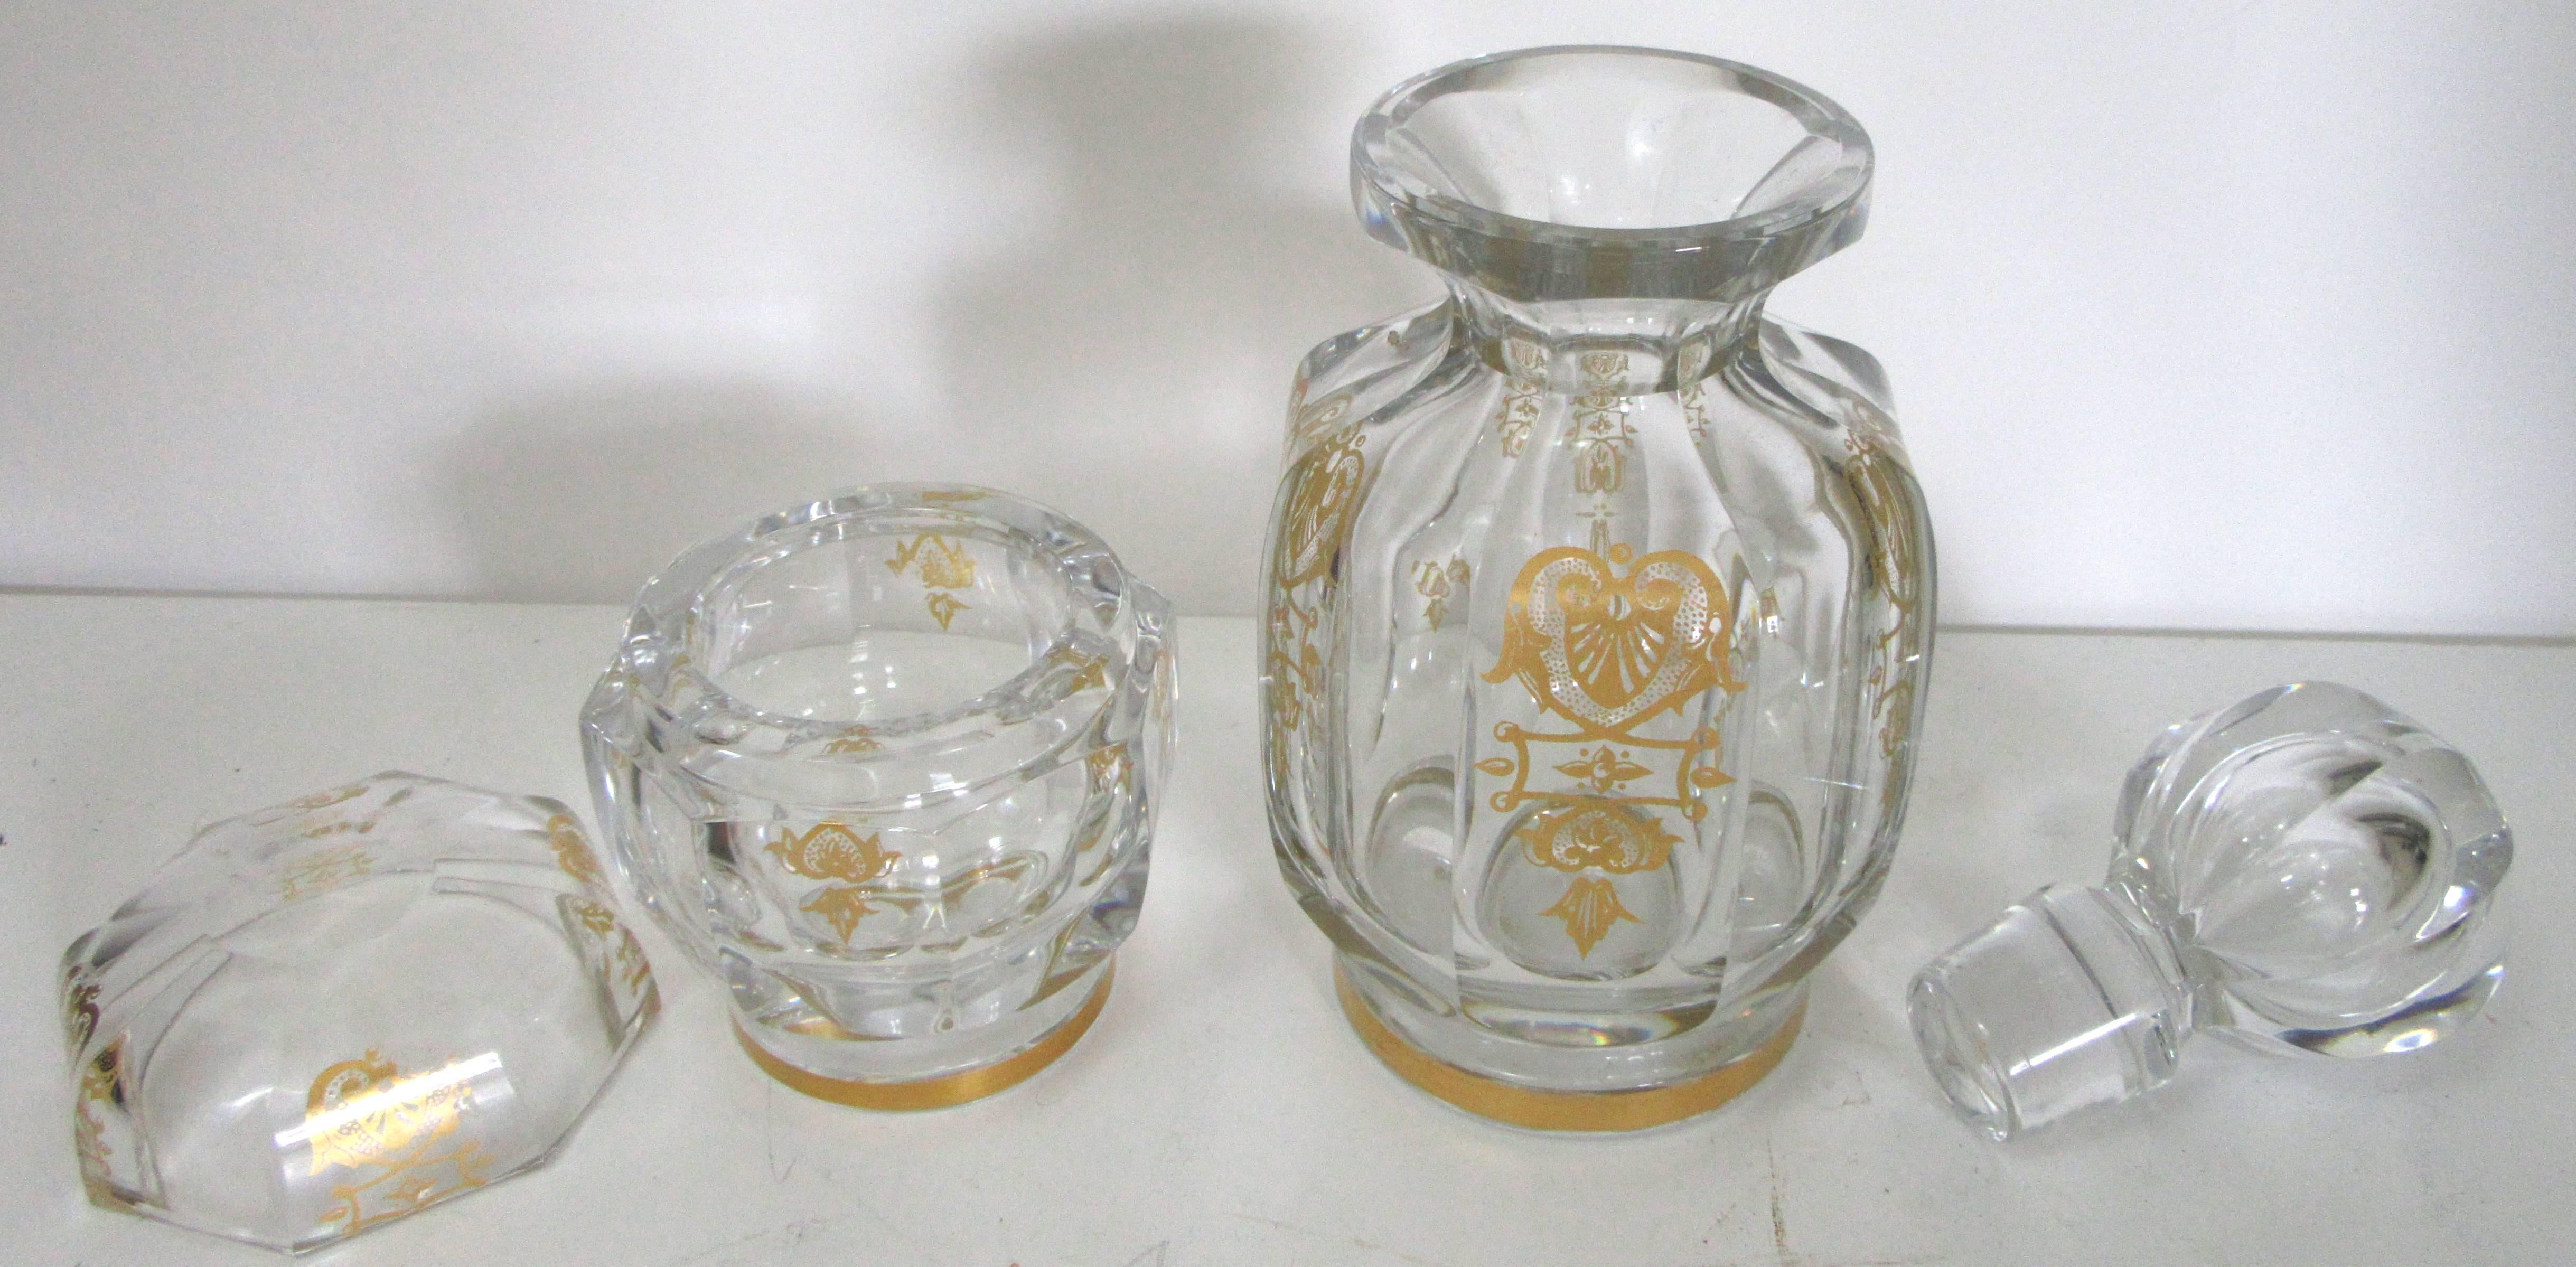 A French Second Empire period crystal decanter and a crystal lidded jar from Baccarat Paris embossed in gold with the 